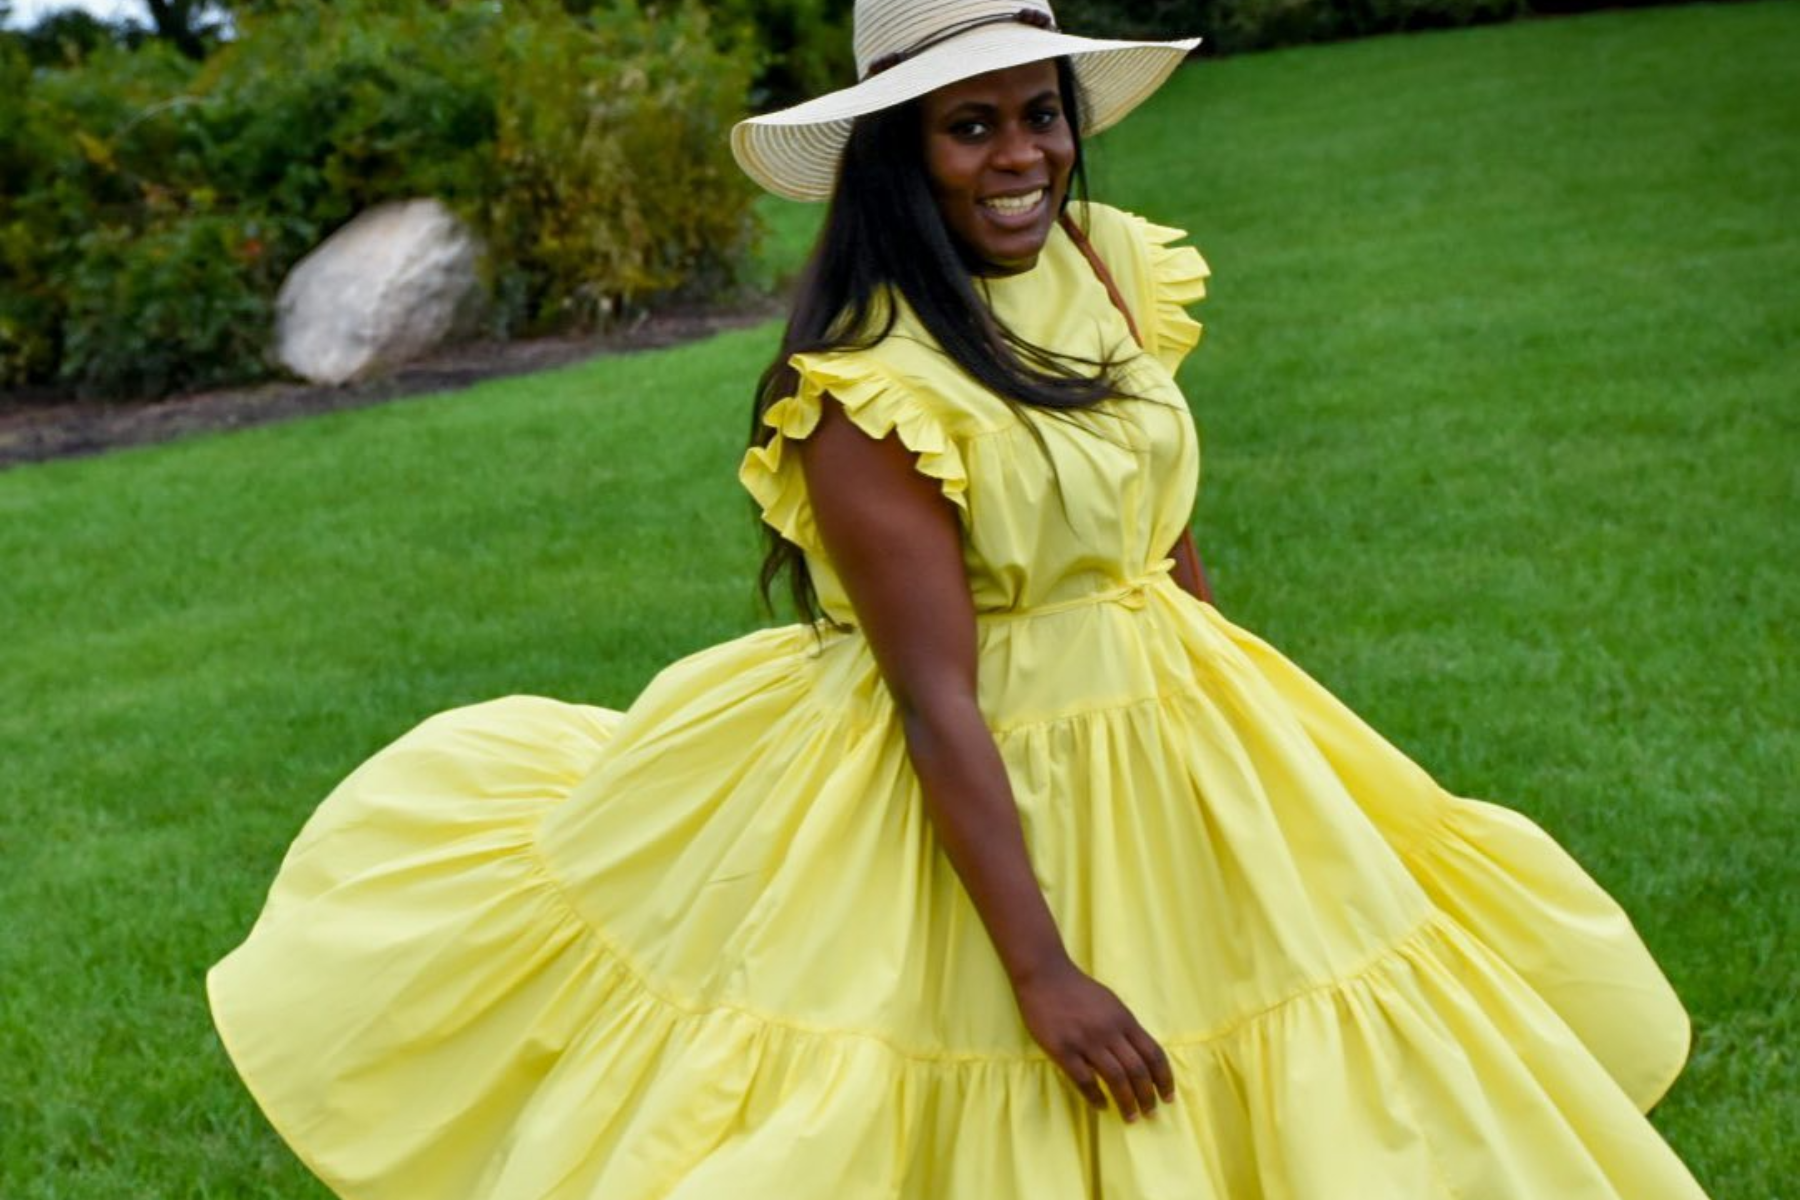 A woman is wearing a yellow skater dress